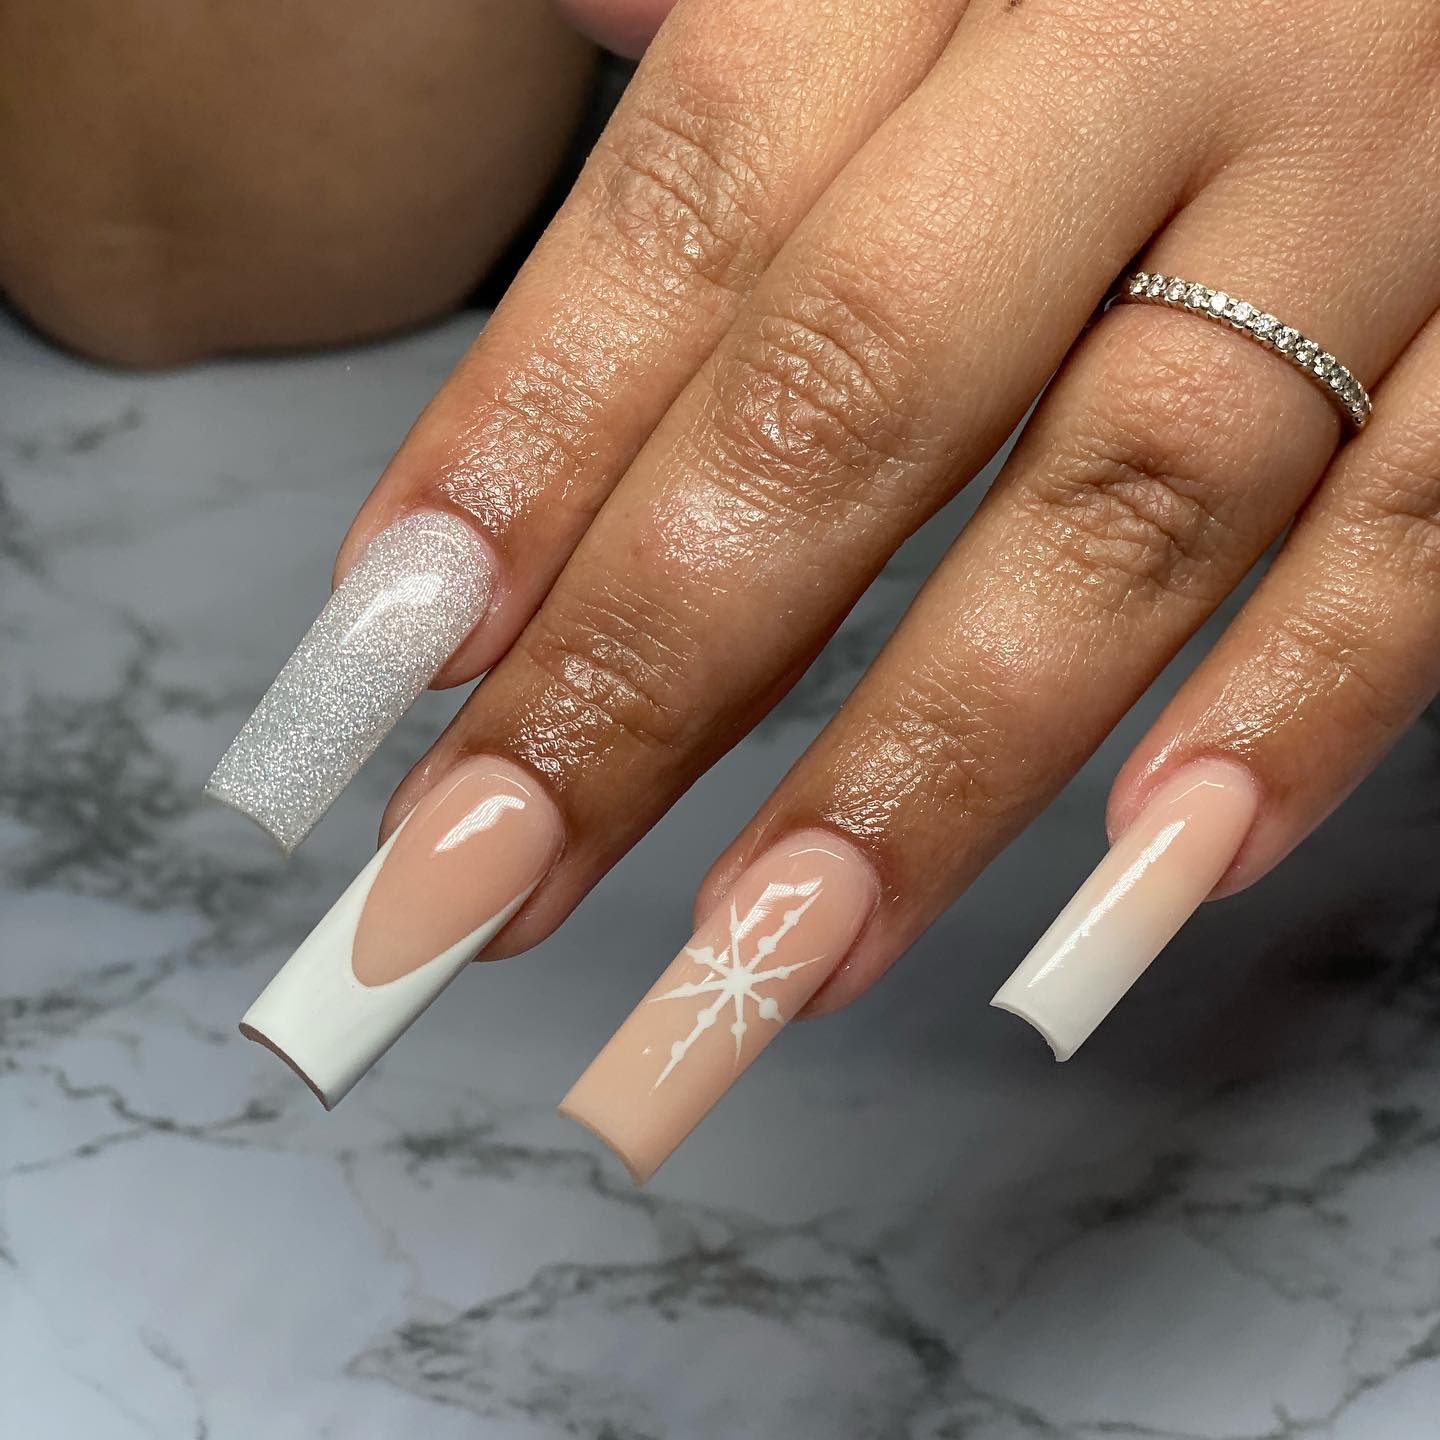 21 Cute and Simple Snowflake Nail Ideas for Christmas 2021 | FAYD